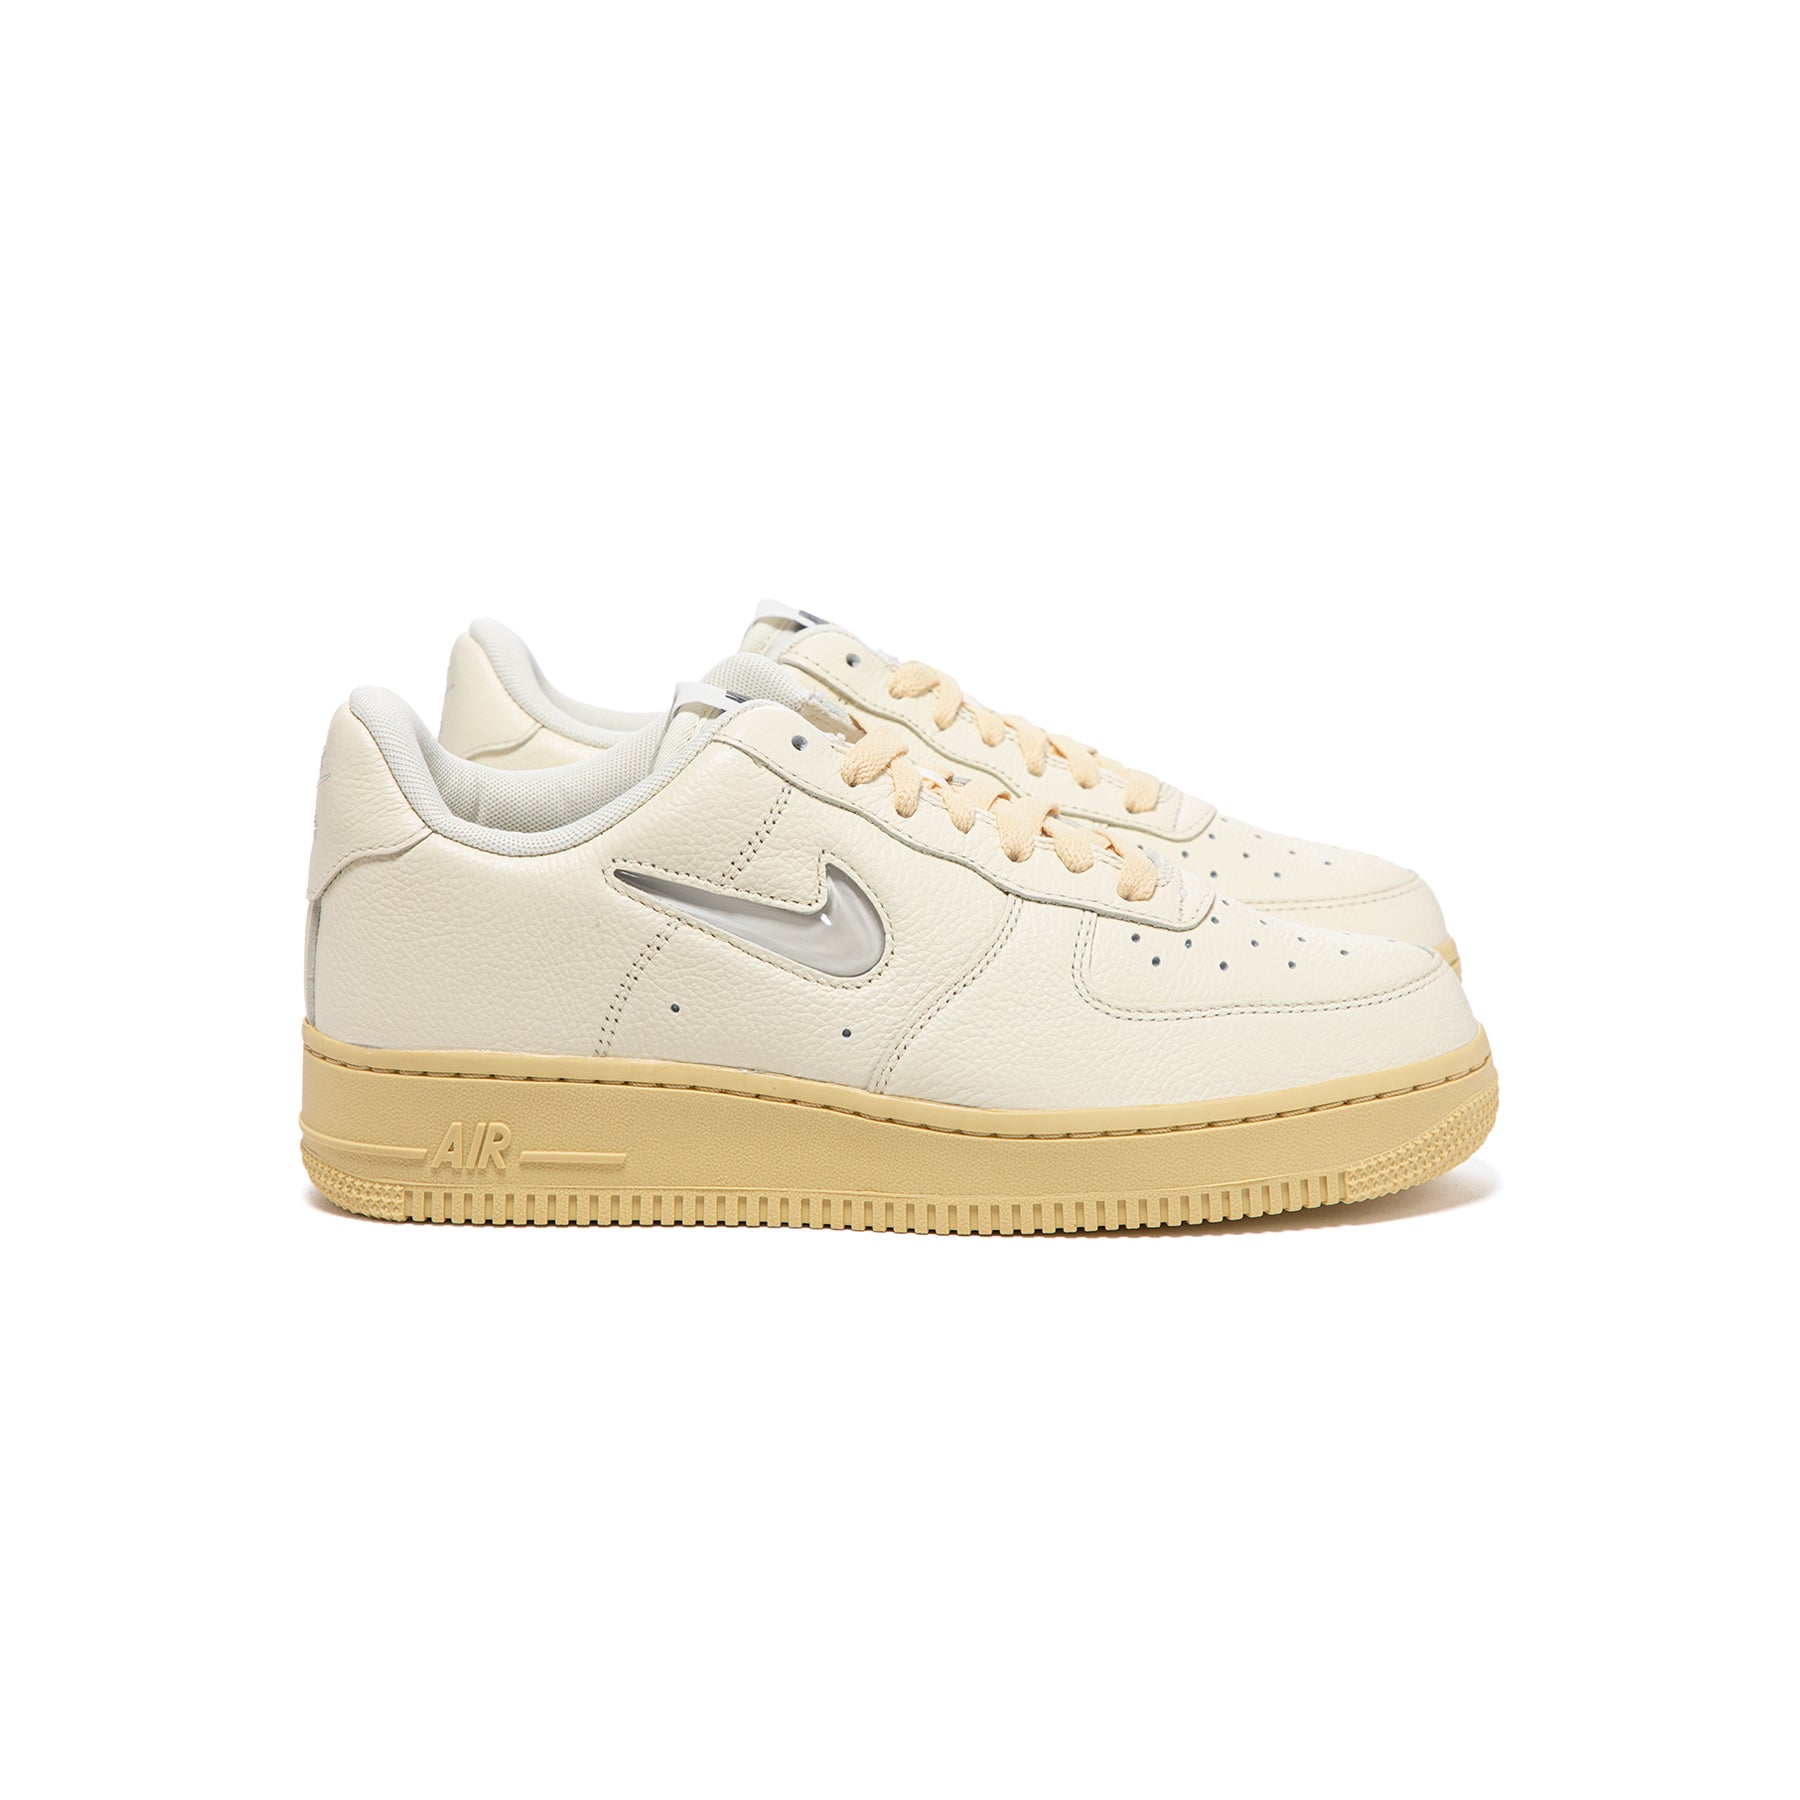 NEW IN BOX WOMENS Nike Air Force 1 '07 COCONUT Milk